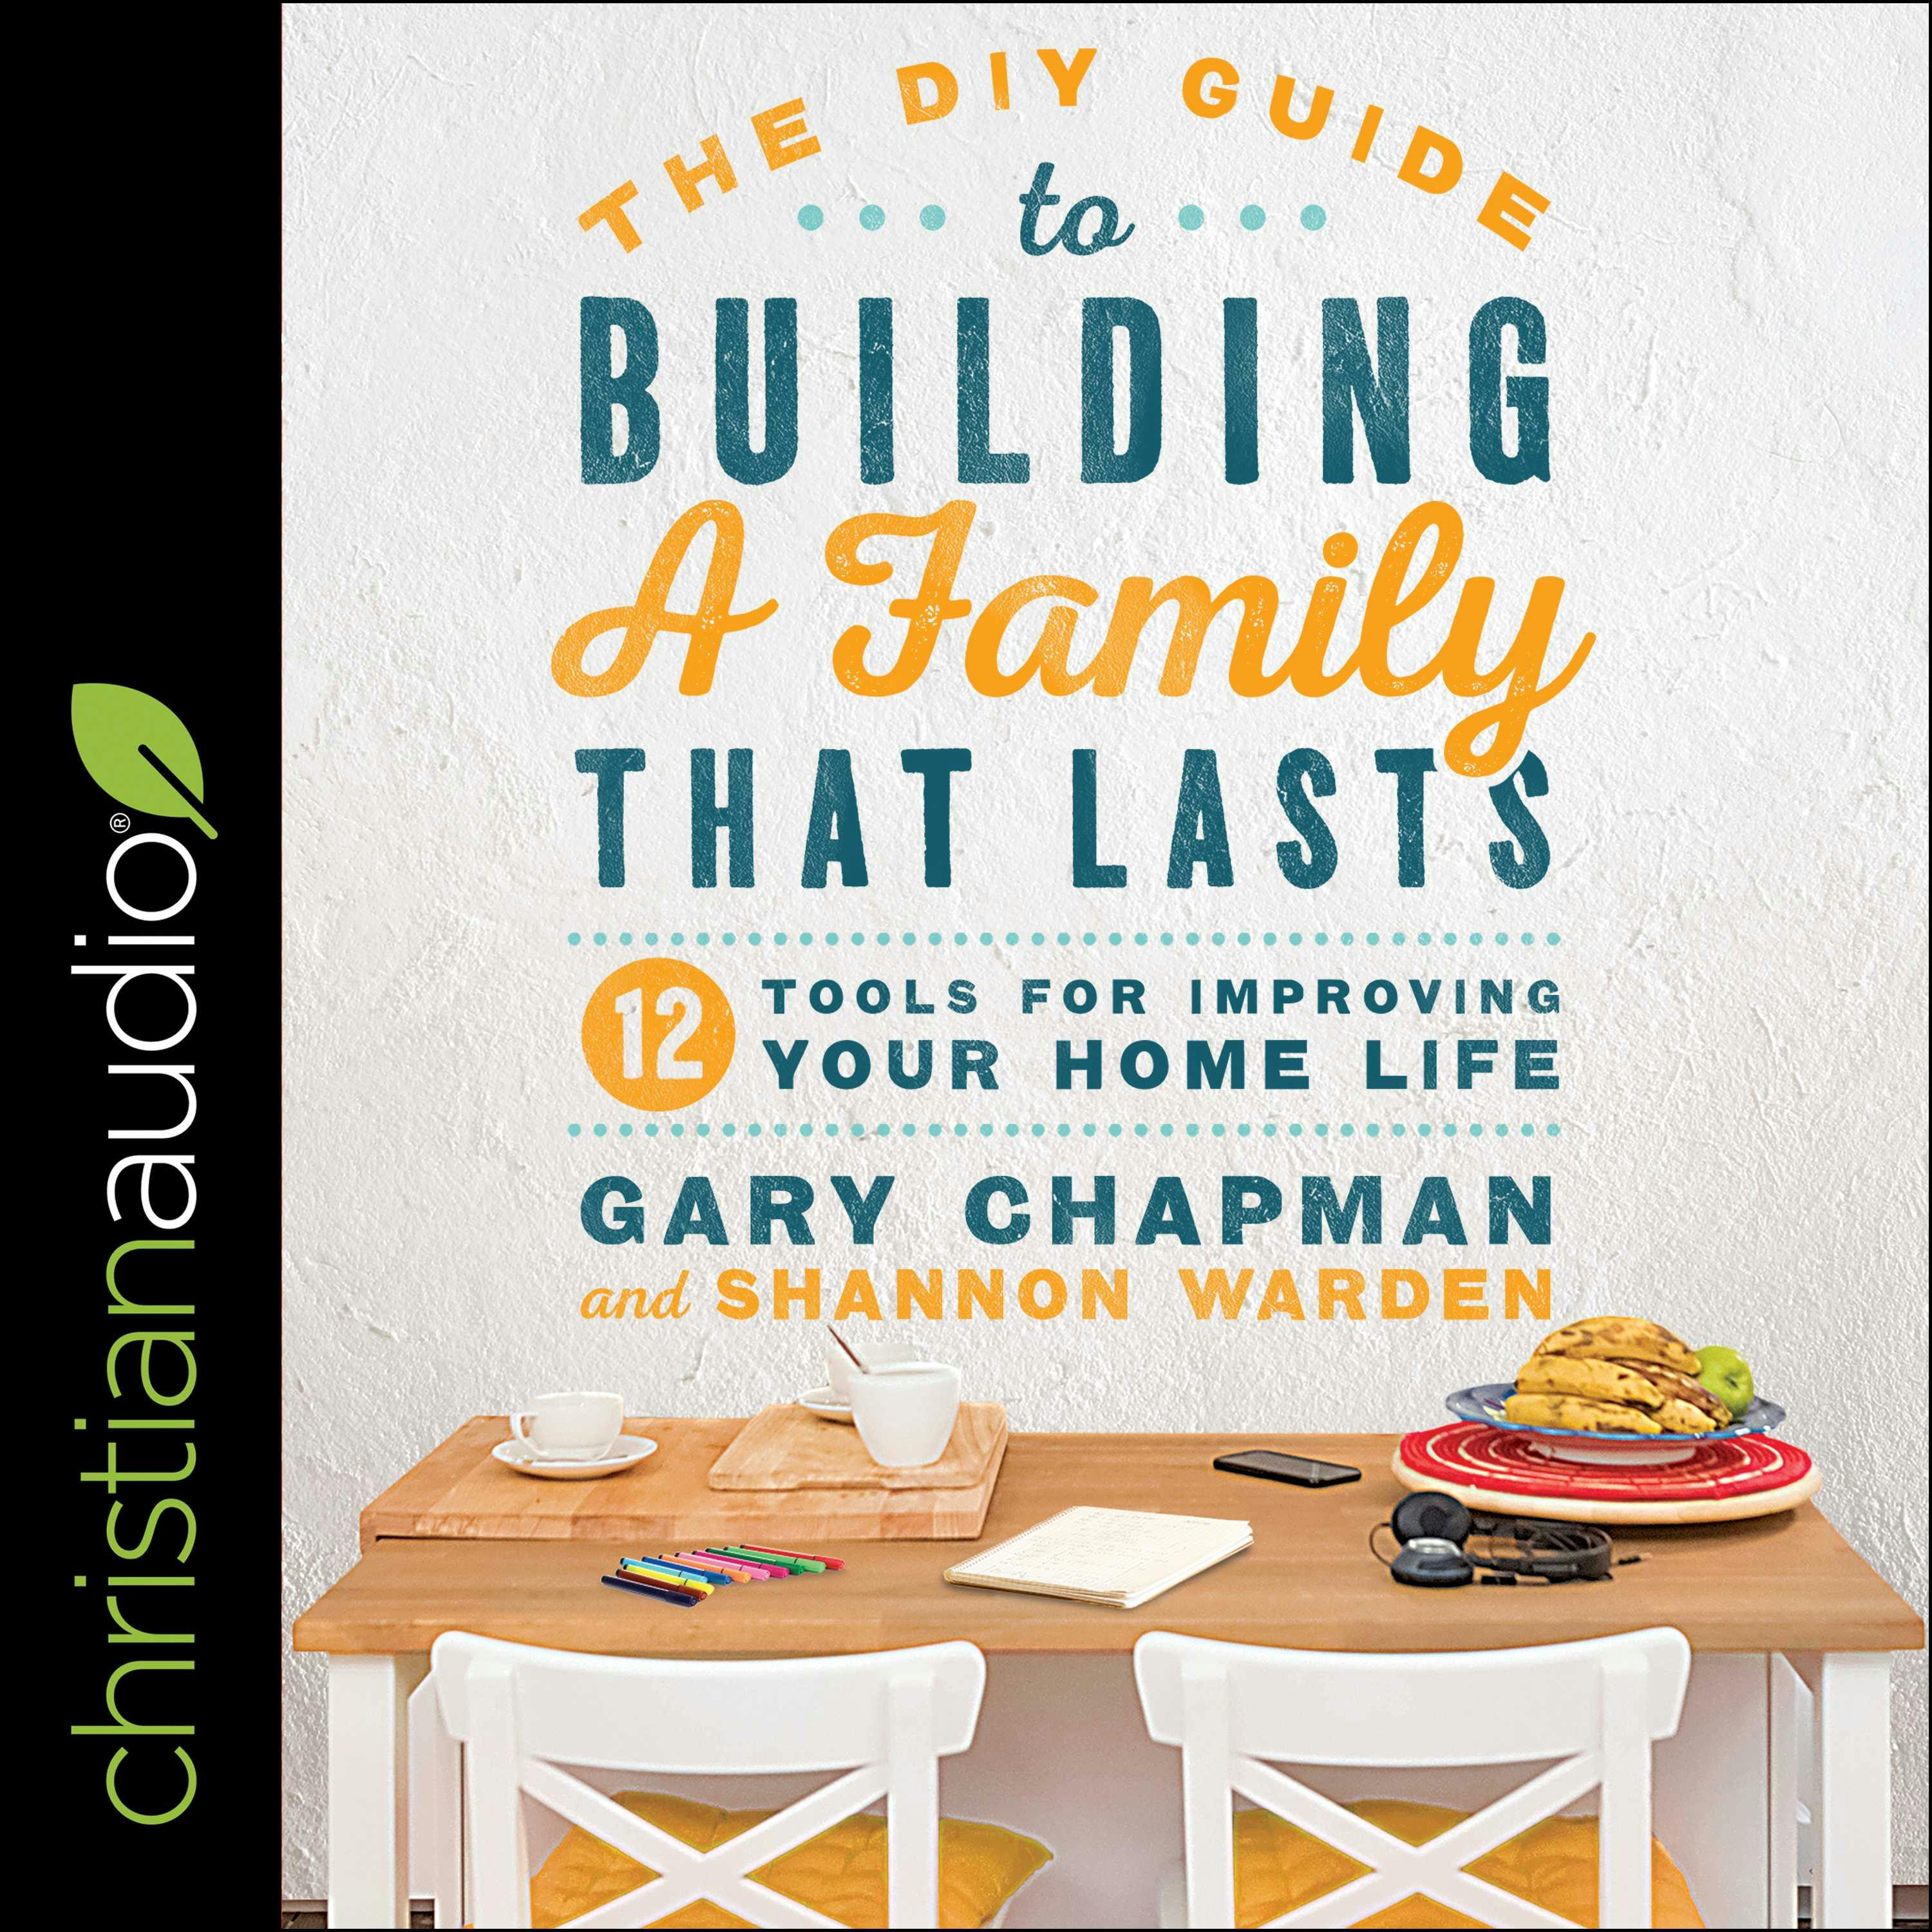 The DIY Guide to Building a Family that Lasts: 12 Tools for Improving Your Home Life - Gary Chapman, Shannon Warden